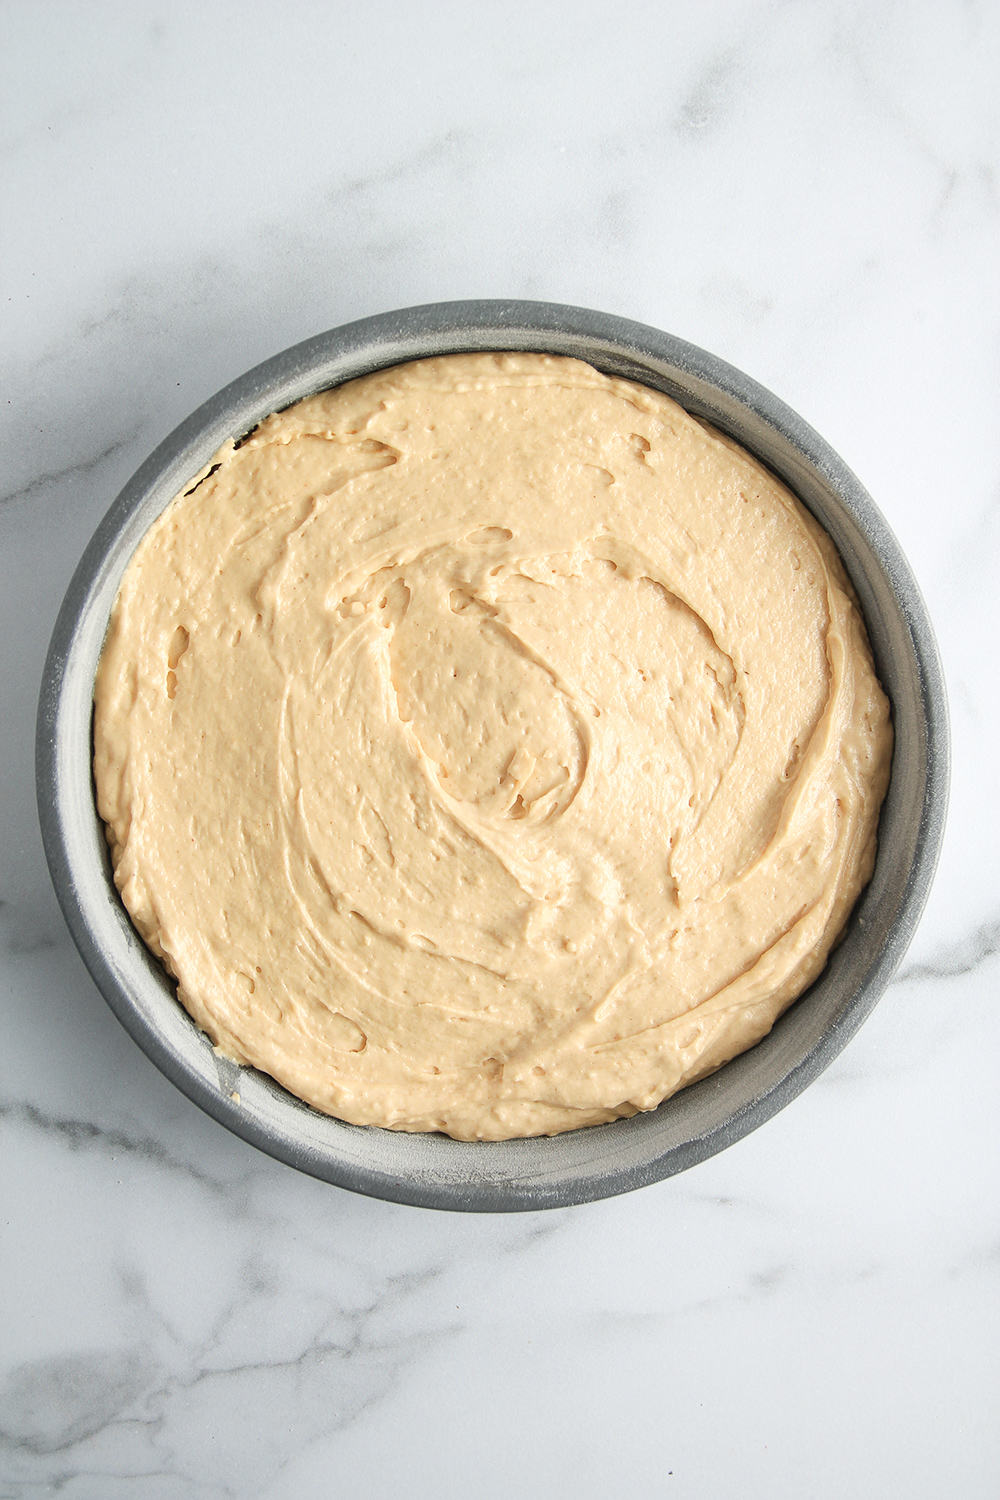 Batter for Peanut Butter Cake is easy to mix up and bake for a delicious peanut butter dessert.